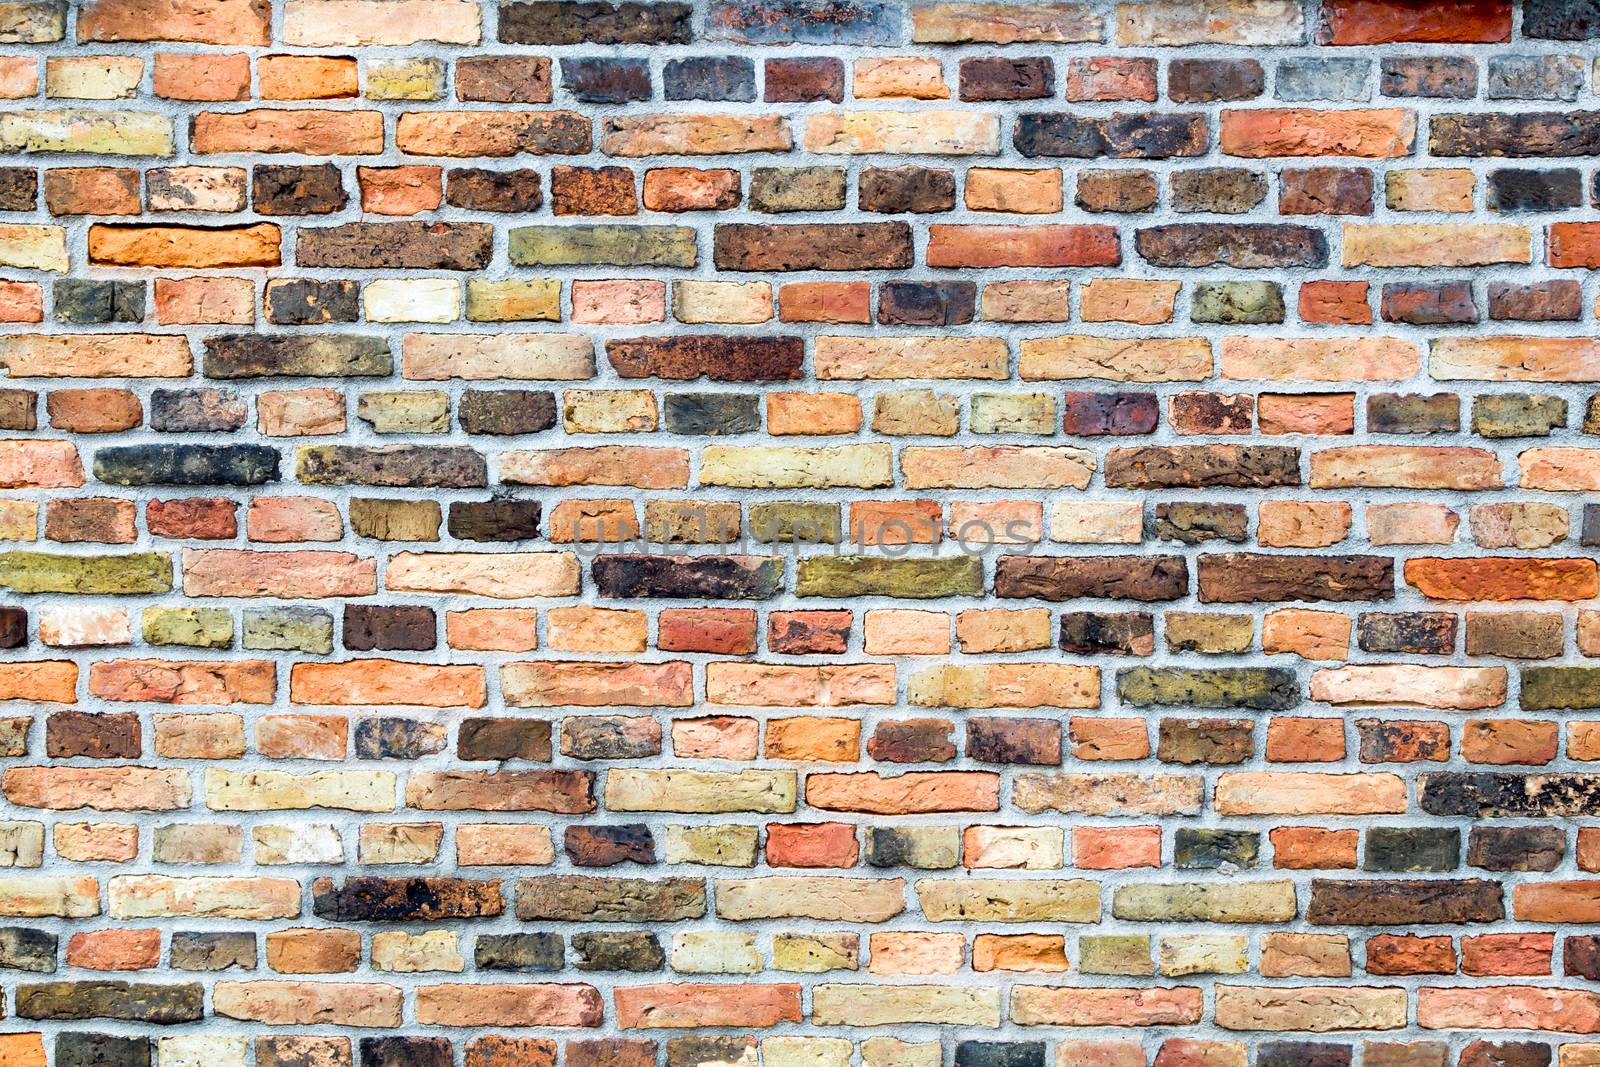 Brick wall with various colors by BenSchonewille